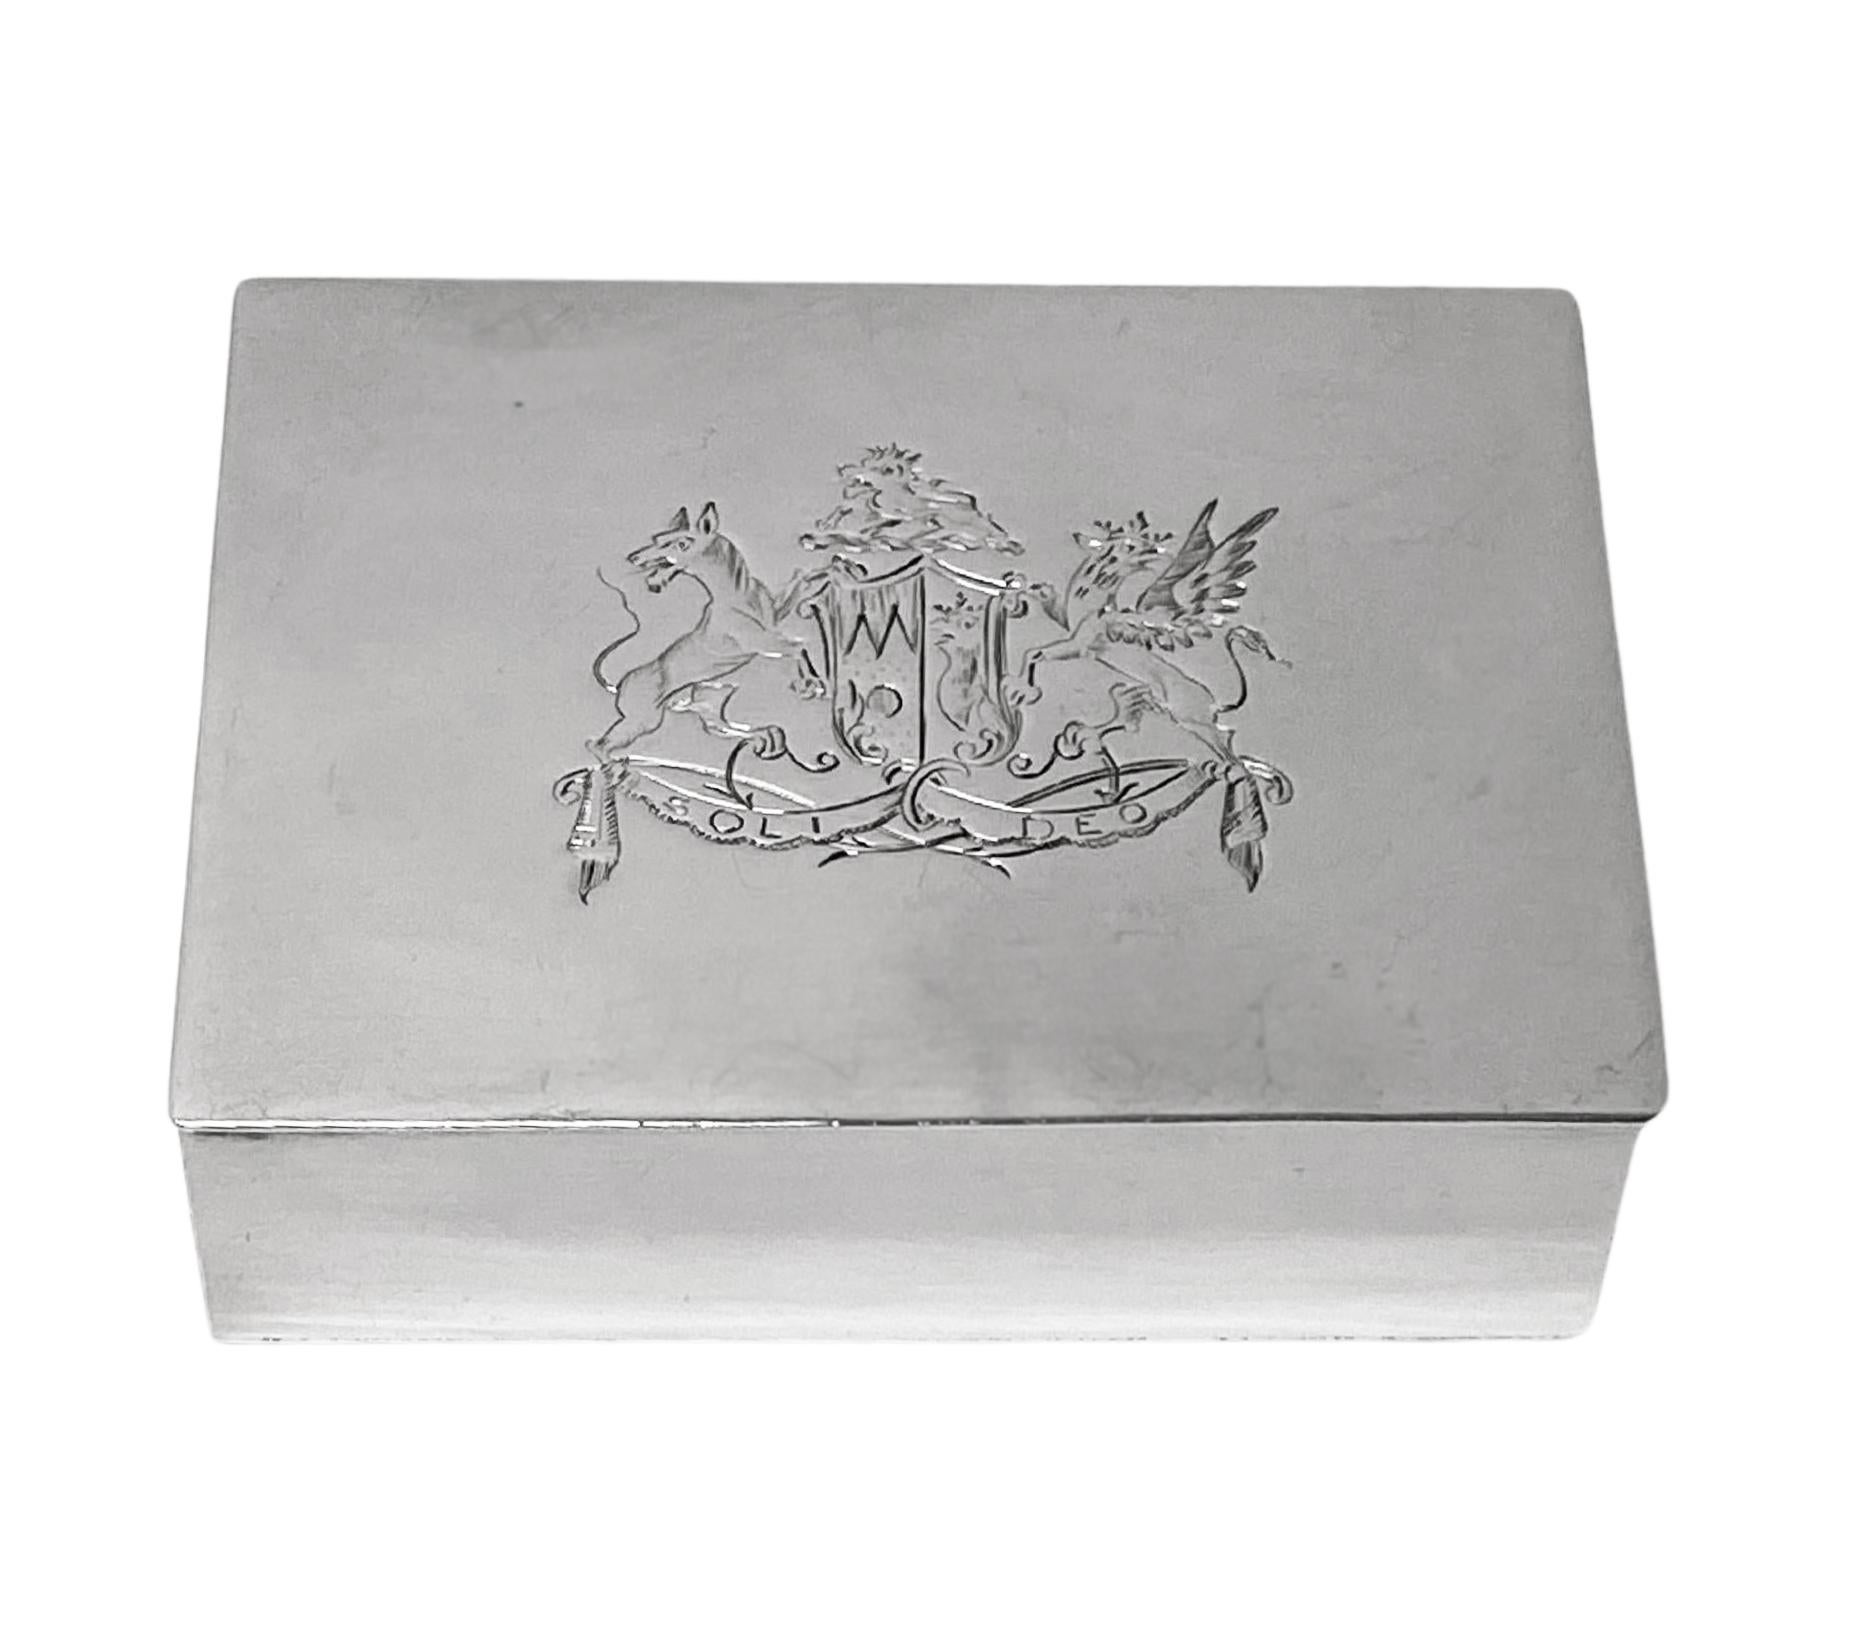 18th century Georgian Silver box London 1793 Henry Chawner and John Emes. The rectangular shape box plain with wonderful engraved coat of arms and motto Soli Deo ( God Alone). Perhaps a scholars box or tobacco snuff.  Measures: 3.12 x 2.31 x 1